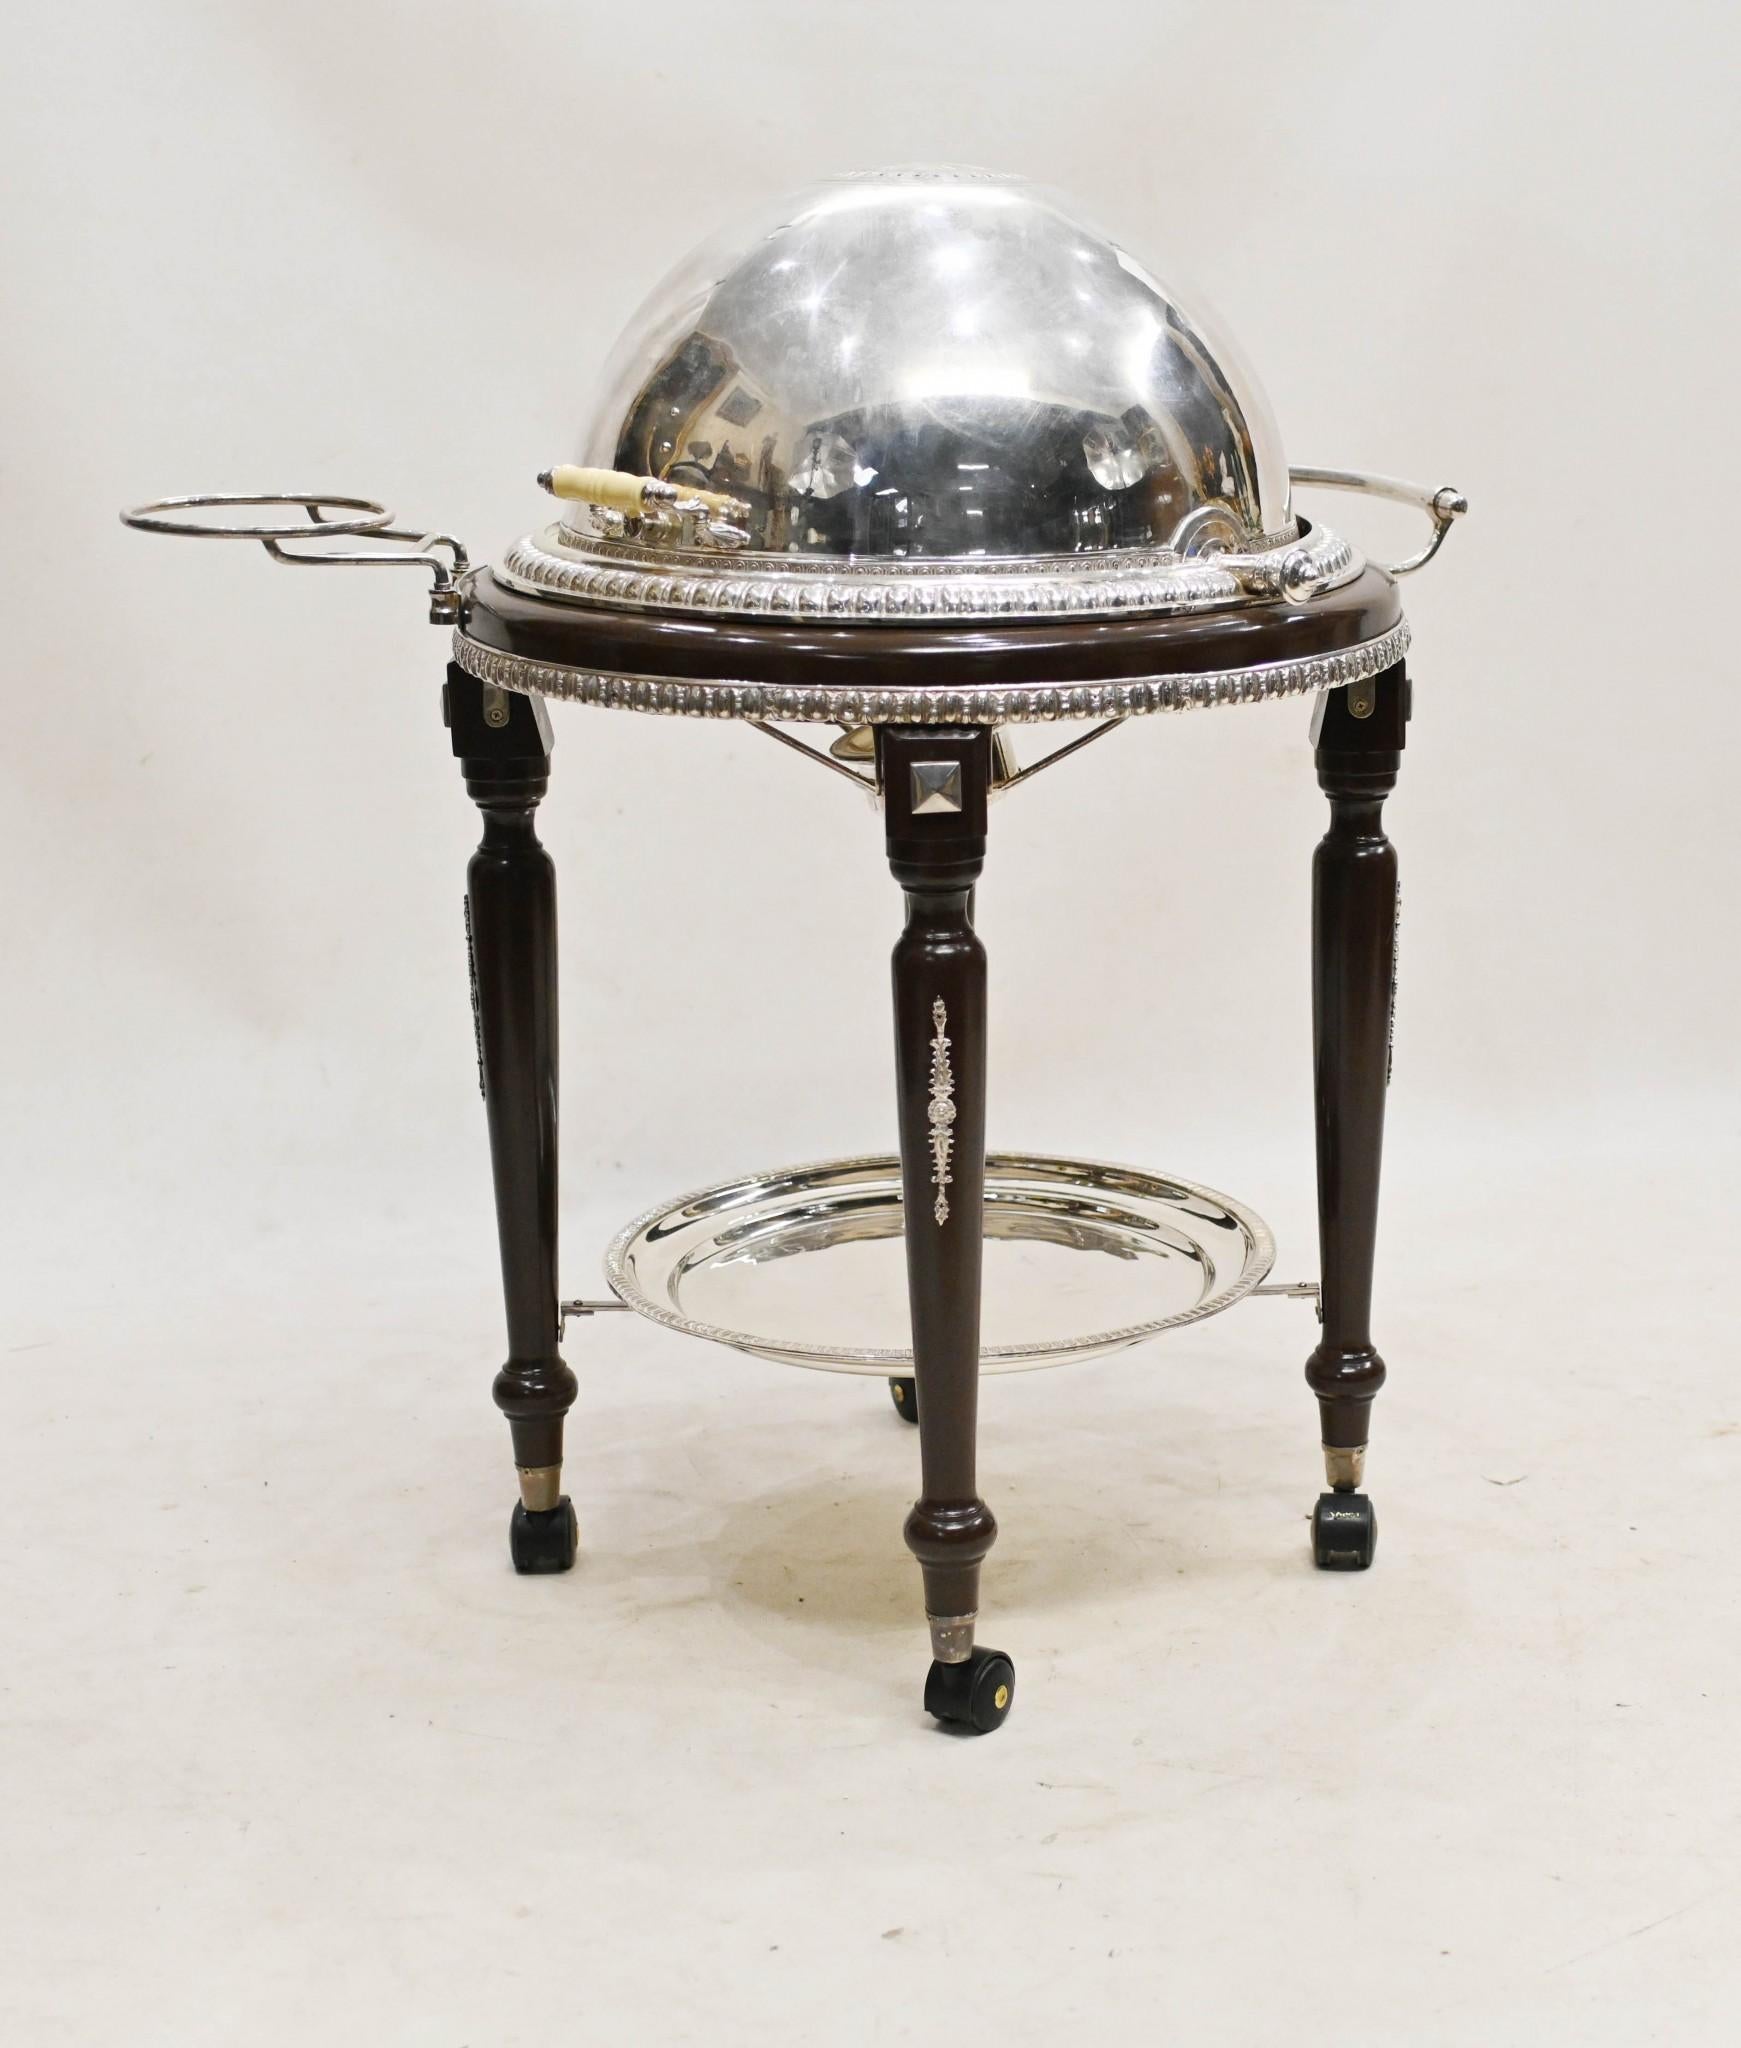 Gorgeous English silver plate and mahogany beef trolley
Classic high end restaurant or carvery piece
Circa 1950s
Portable revolving silver plate food trolley complete with plate rack and burners
Fully restored to formed glory
Piece is on castors and